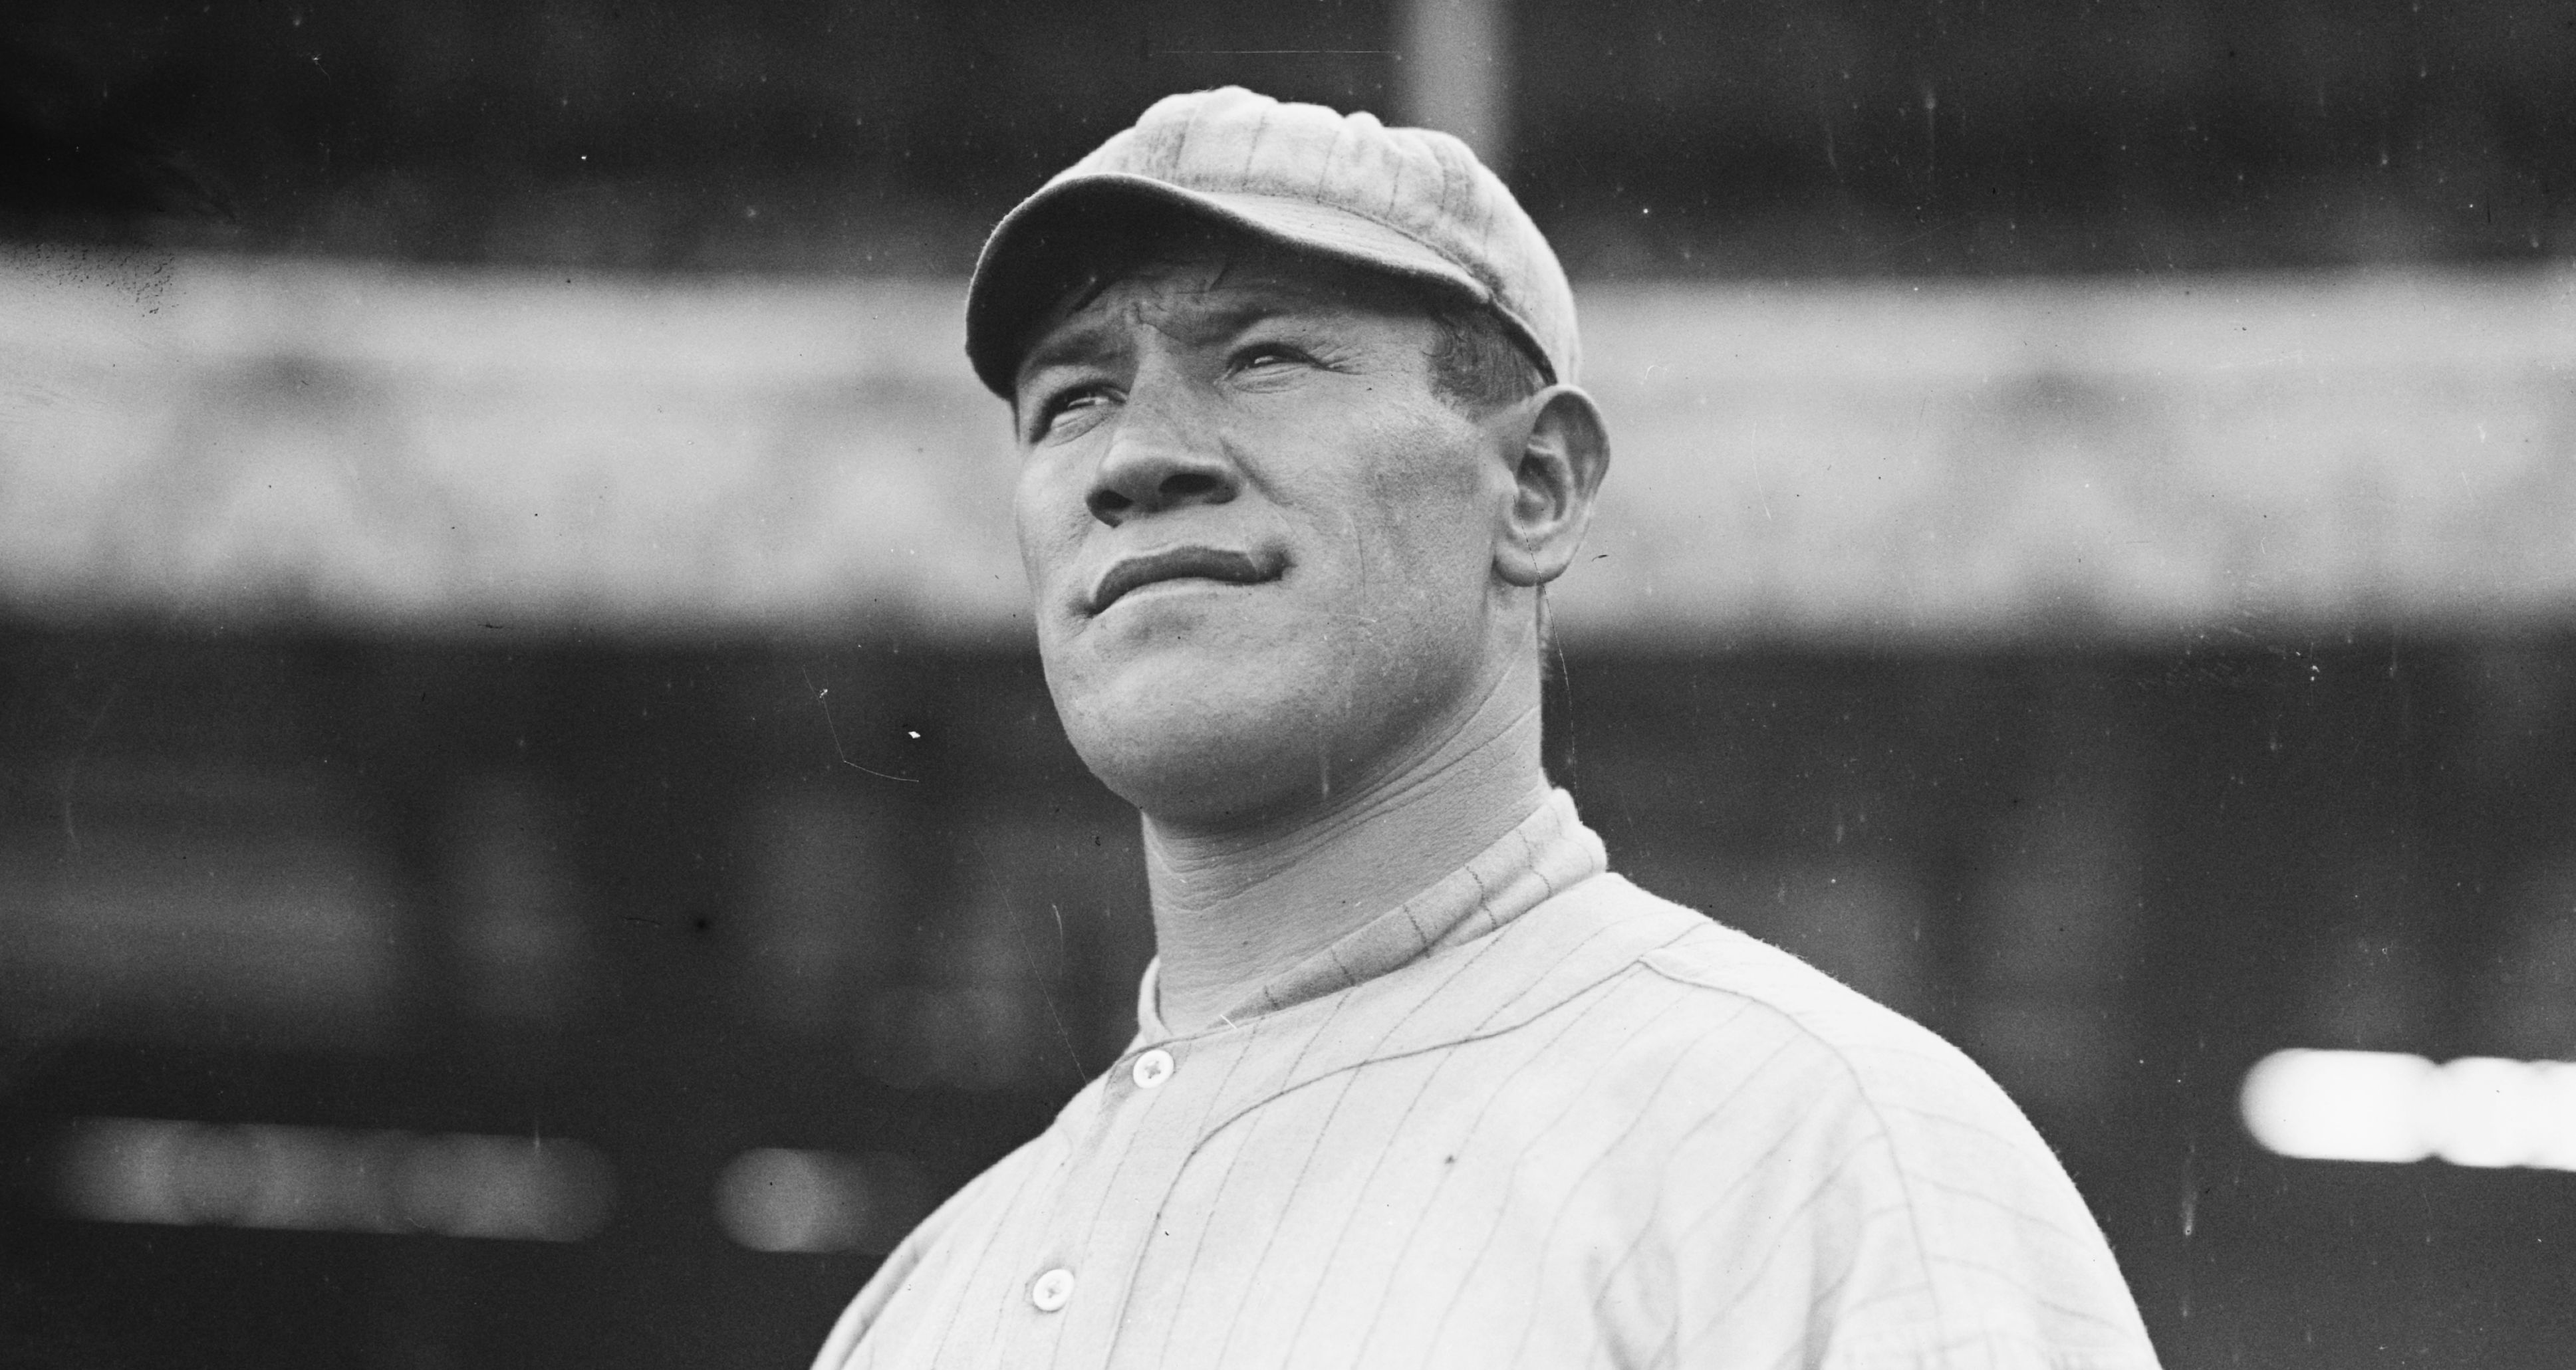 Jim Thorpe at New York City's Polo Grounds in 1913. Library of Congress.